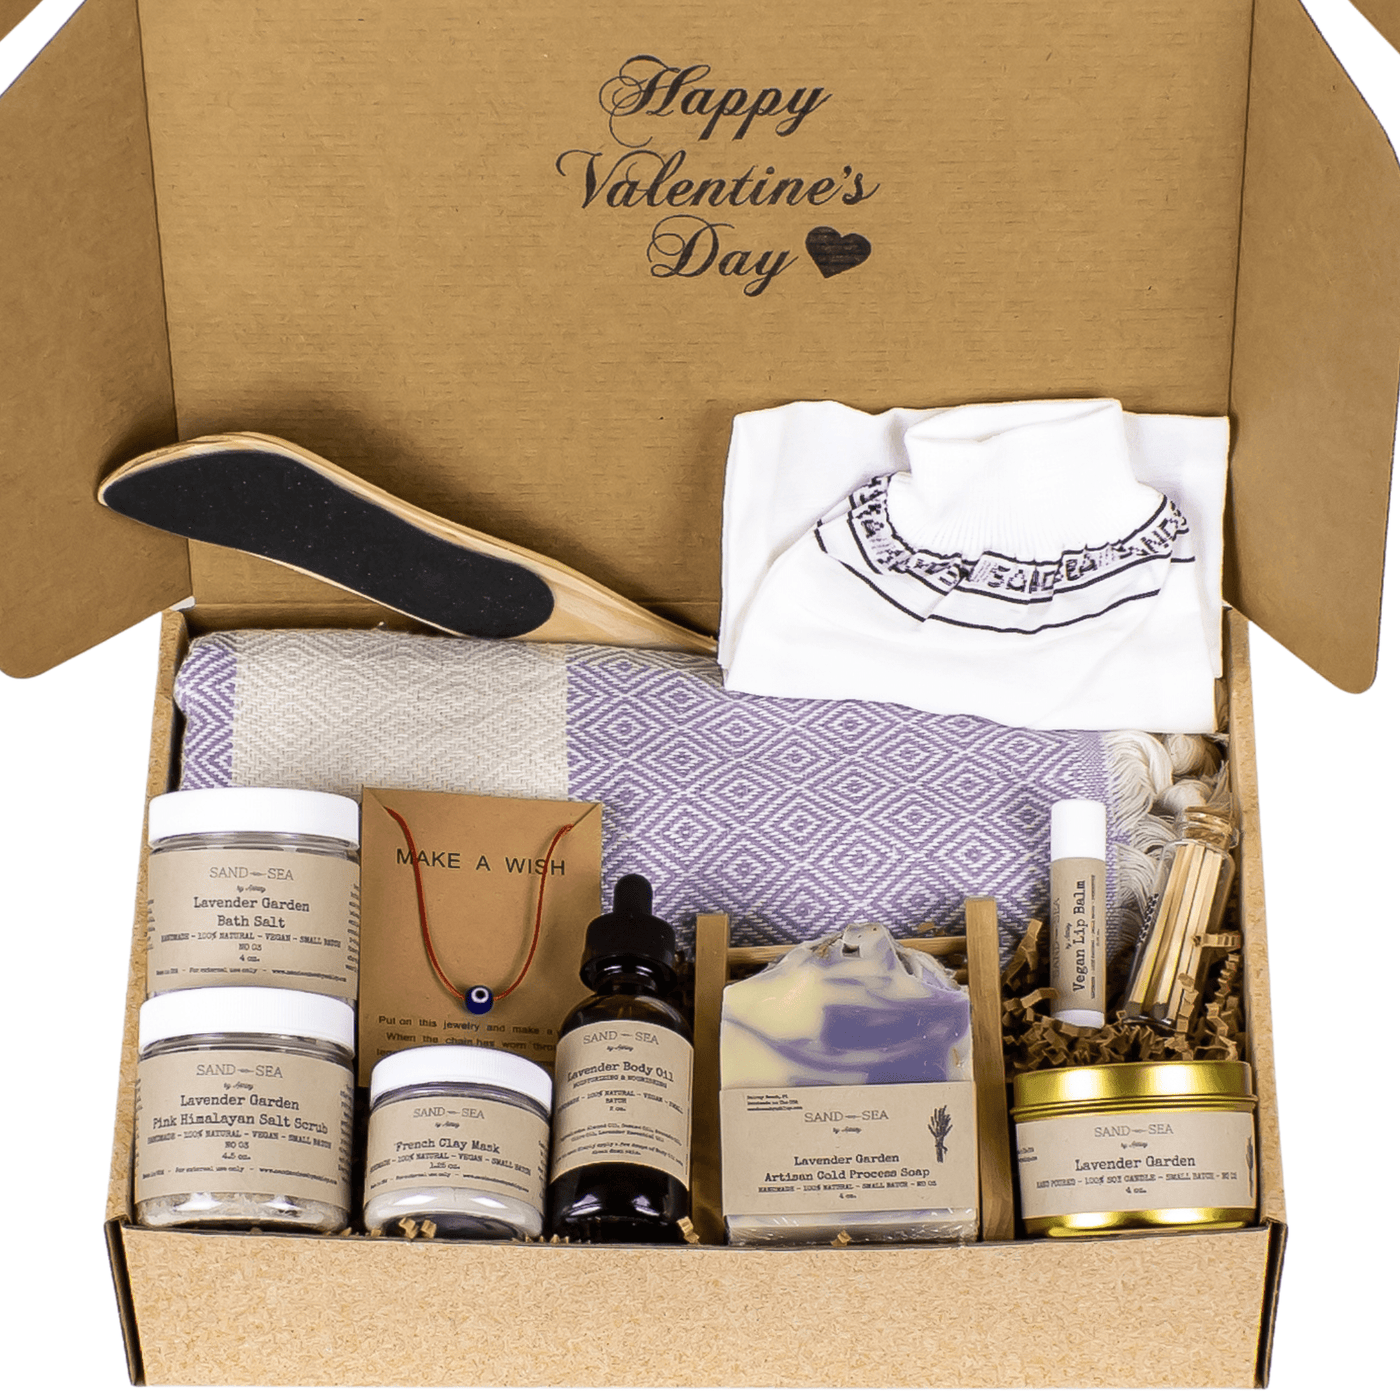 Valentine's Day Spa Gift Baskets for Women - Handmade Unique and Pampering Stress Relief Lavender Spa Gift Box with Turkish Beach Towel - 13 pieces - Sand & Sea by Ashley